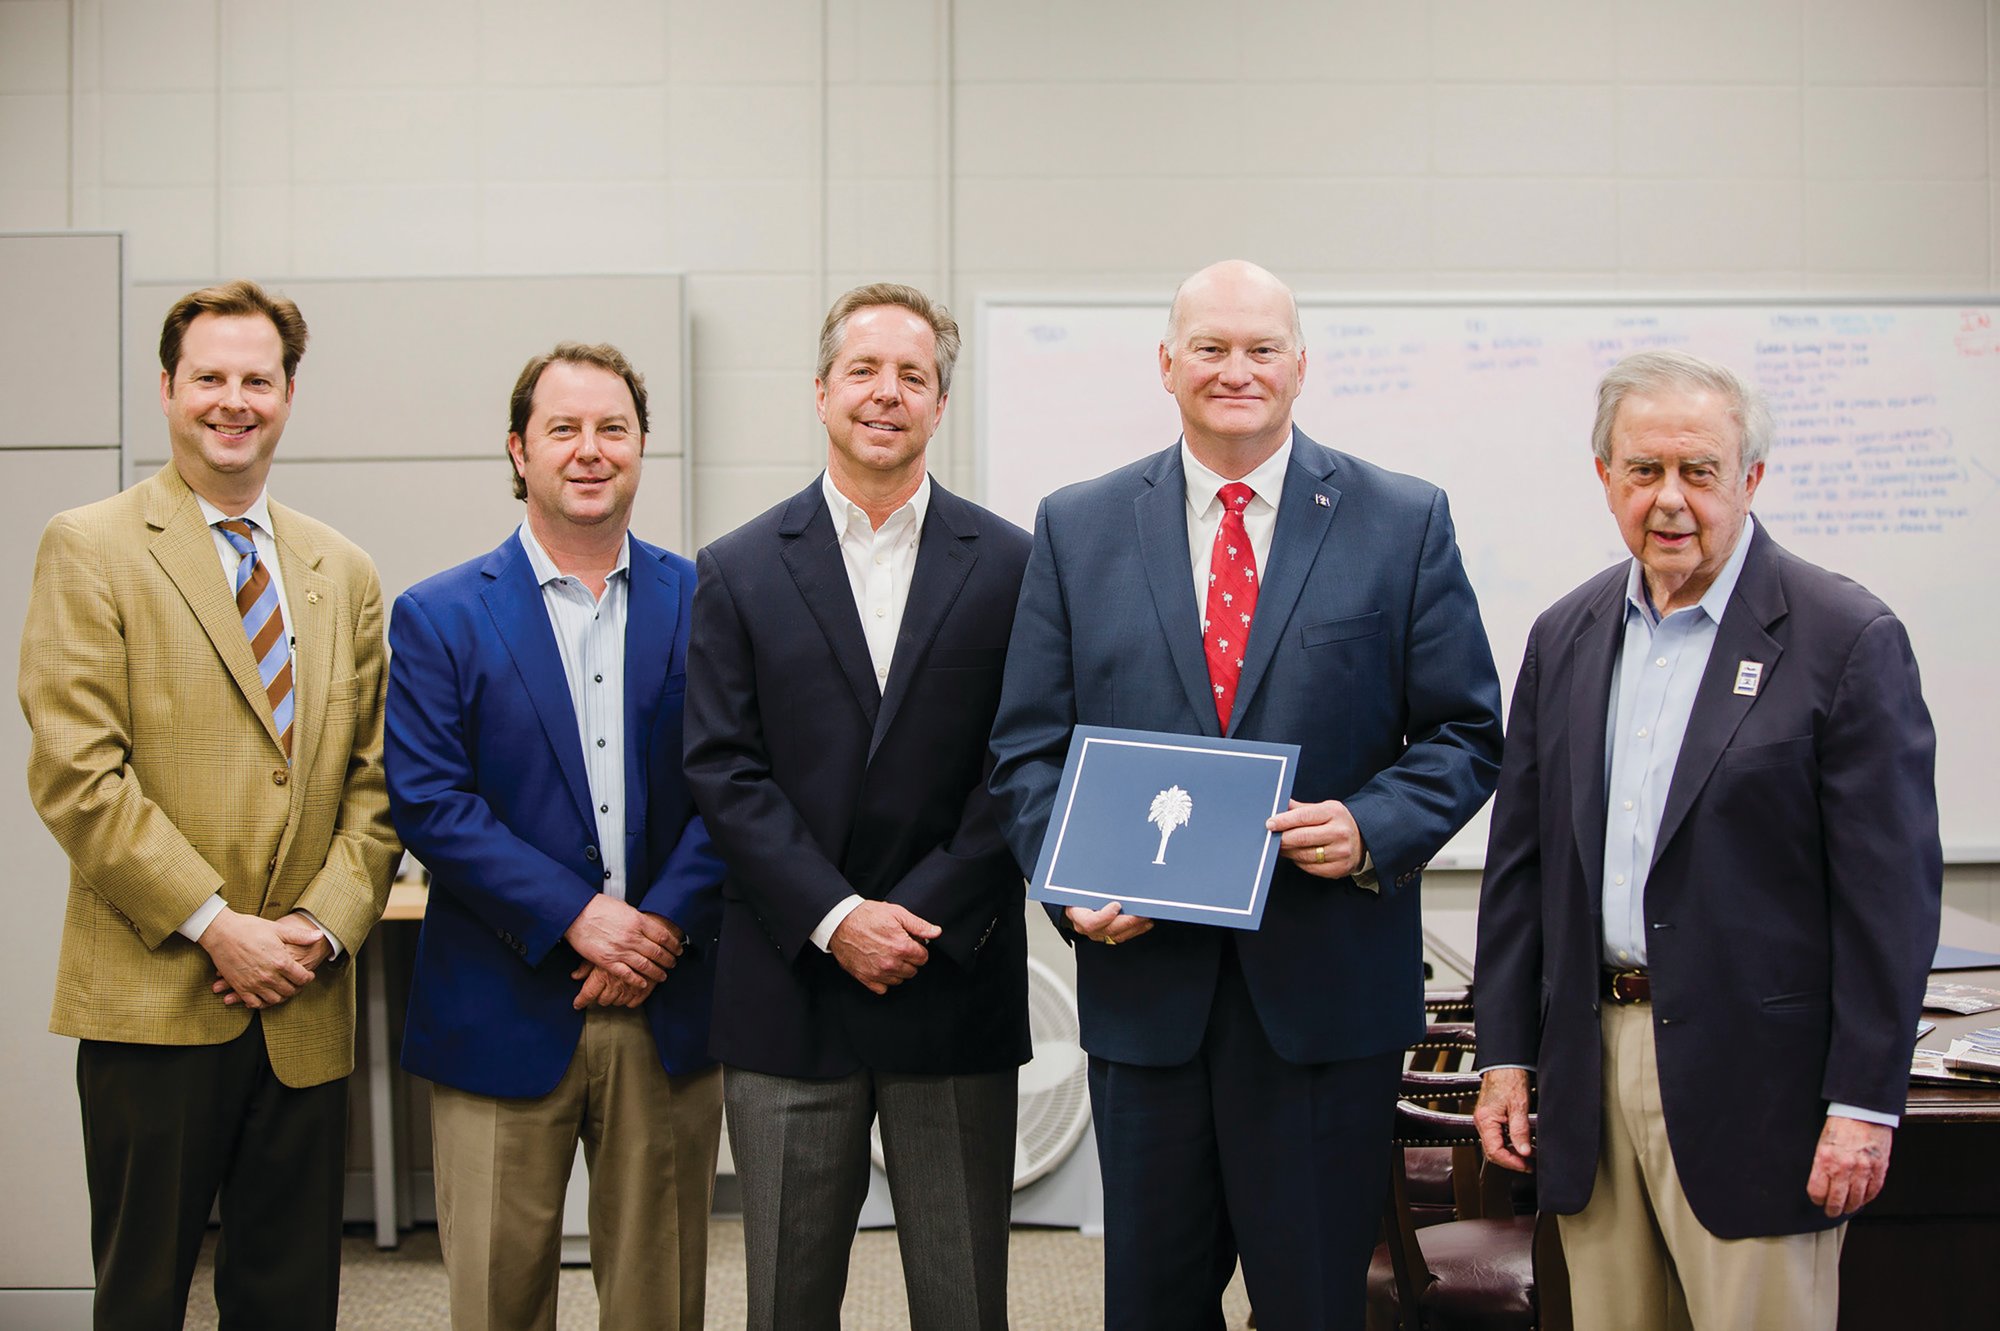 From left, Jack, Kyle and Graham Osteen stand with South Carolina Secretary of State Mark Hammond and their father, Hubert D. Osteen Jr., in The Sumter Item newsroom in March 2018. Hammond recognized the newspaper for being on file with the Secretary of State's Office for more than 100 years. The newspaper celebrated 125 years of serving the Sumter community in October 2019.